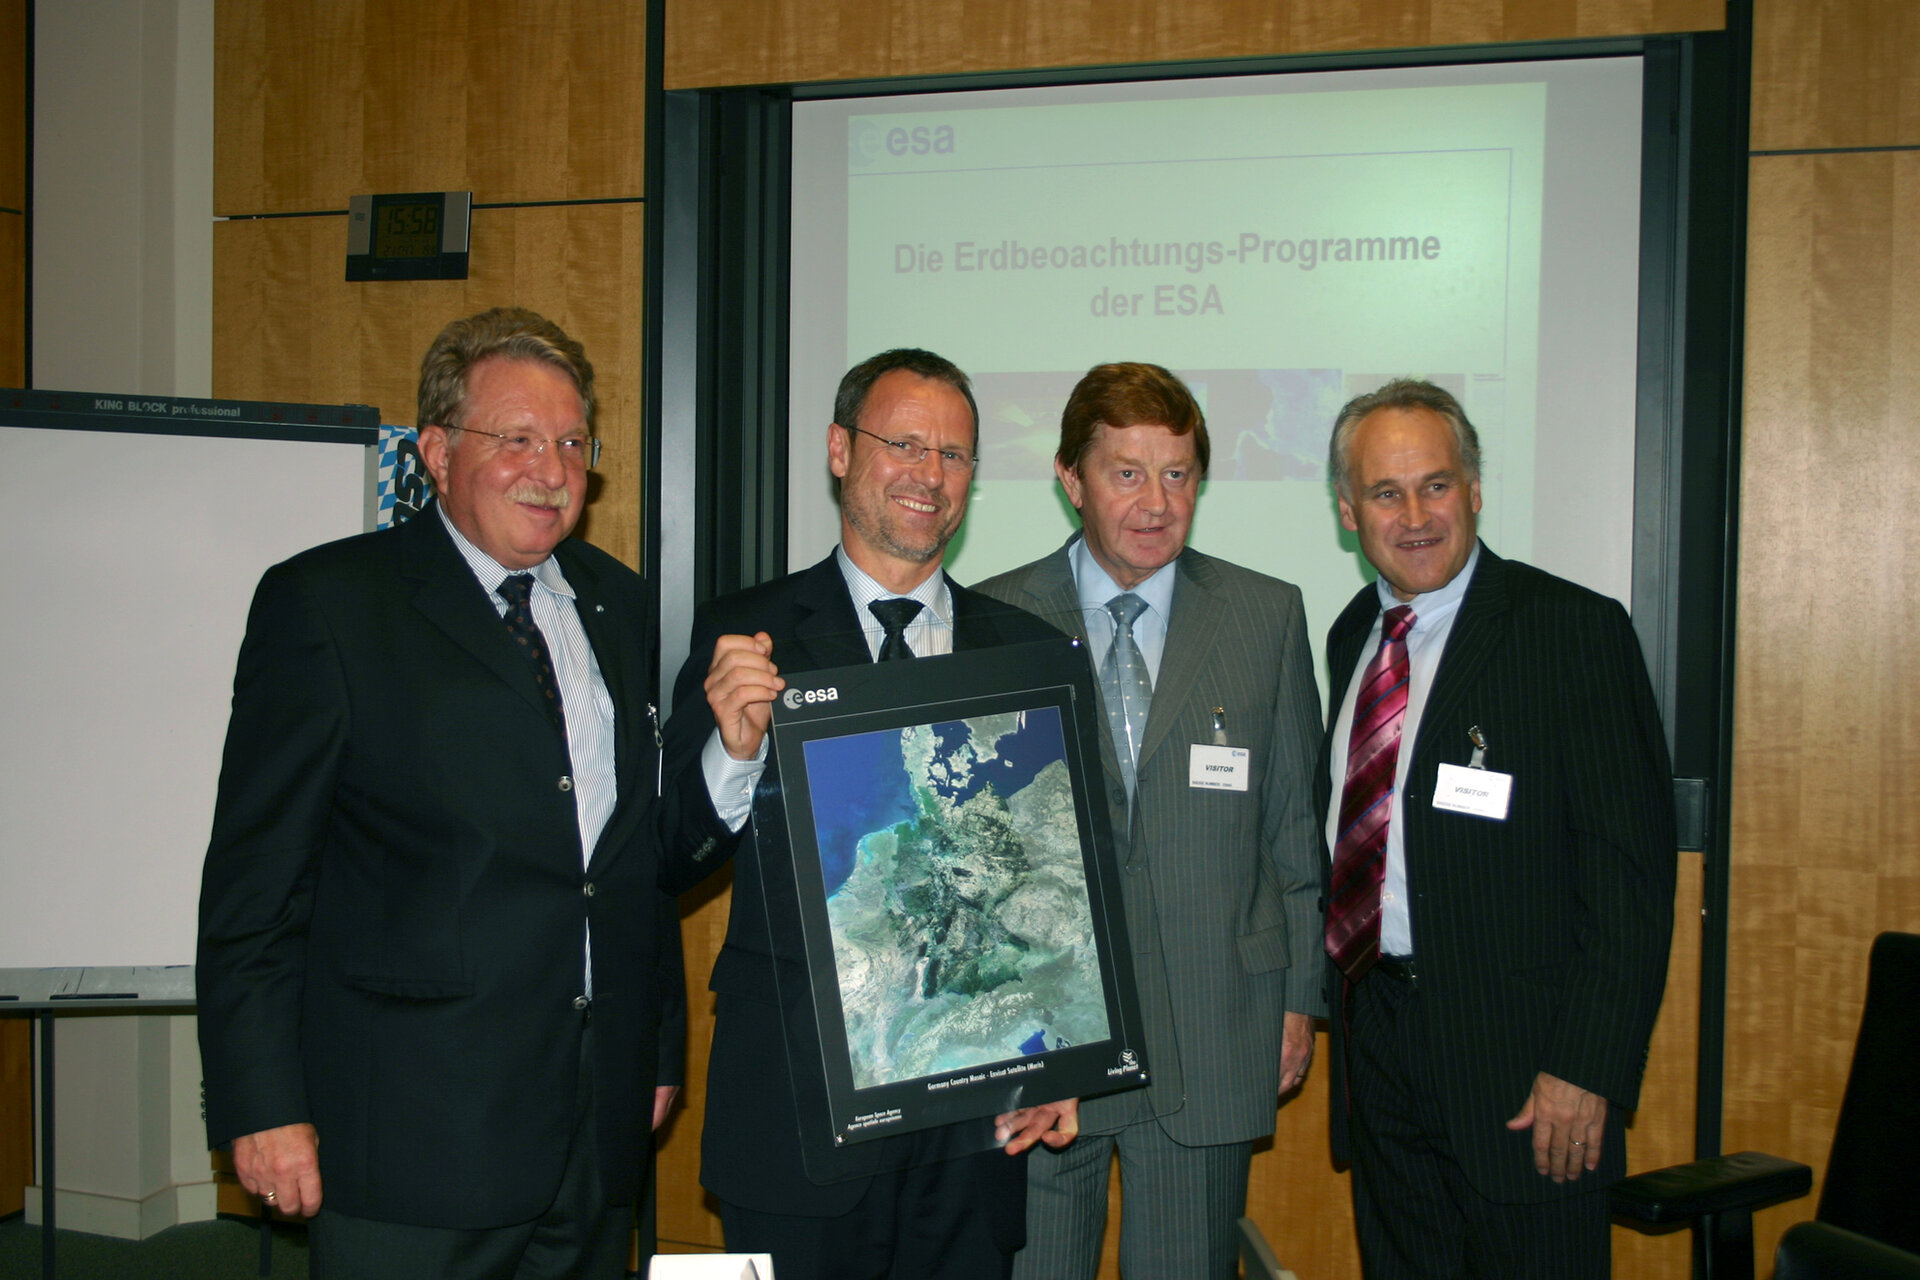 Dr. Otmar Bernhard,  Dr Liebig, Dr. Otto Wiesheu and Dr Erwin Huber, from left to right